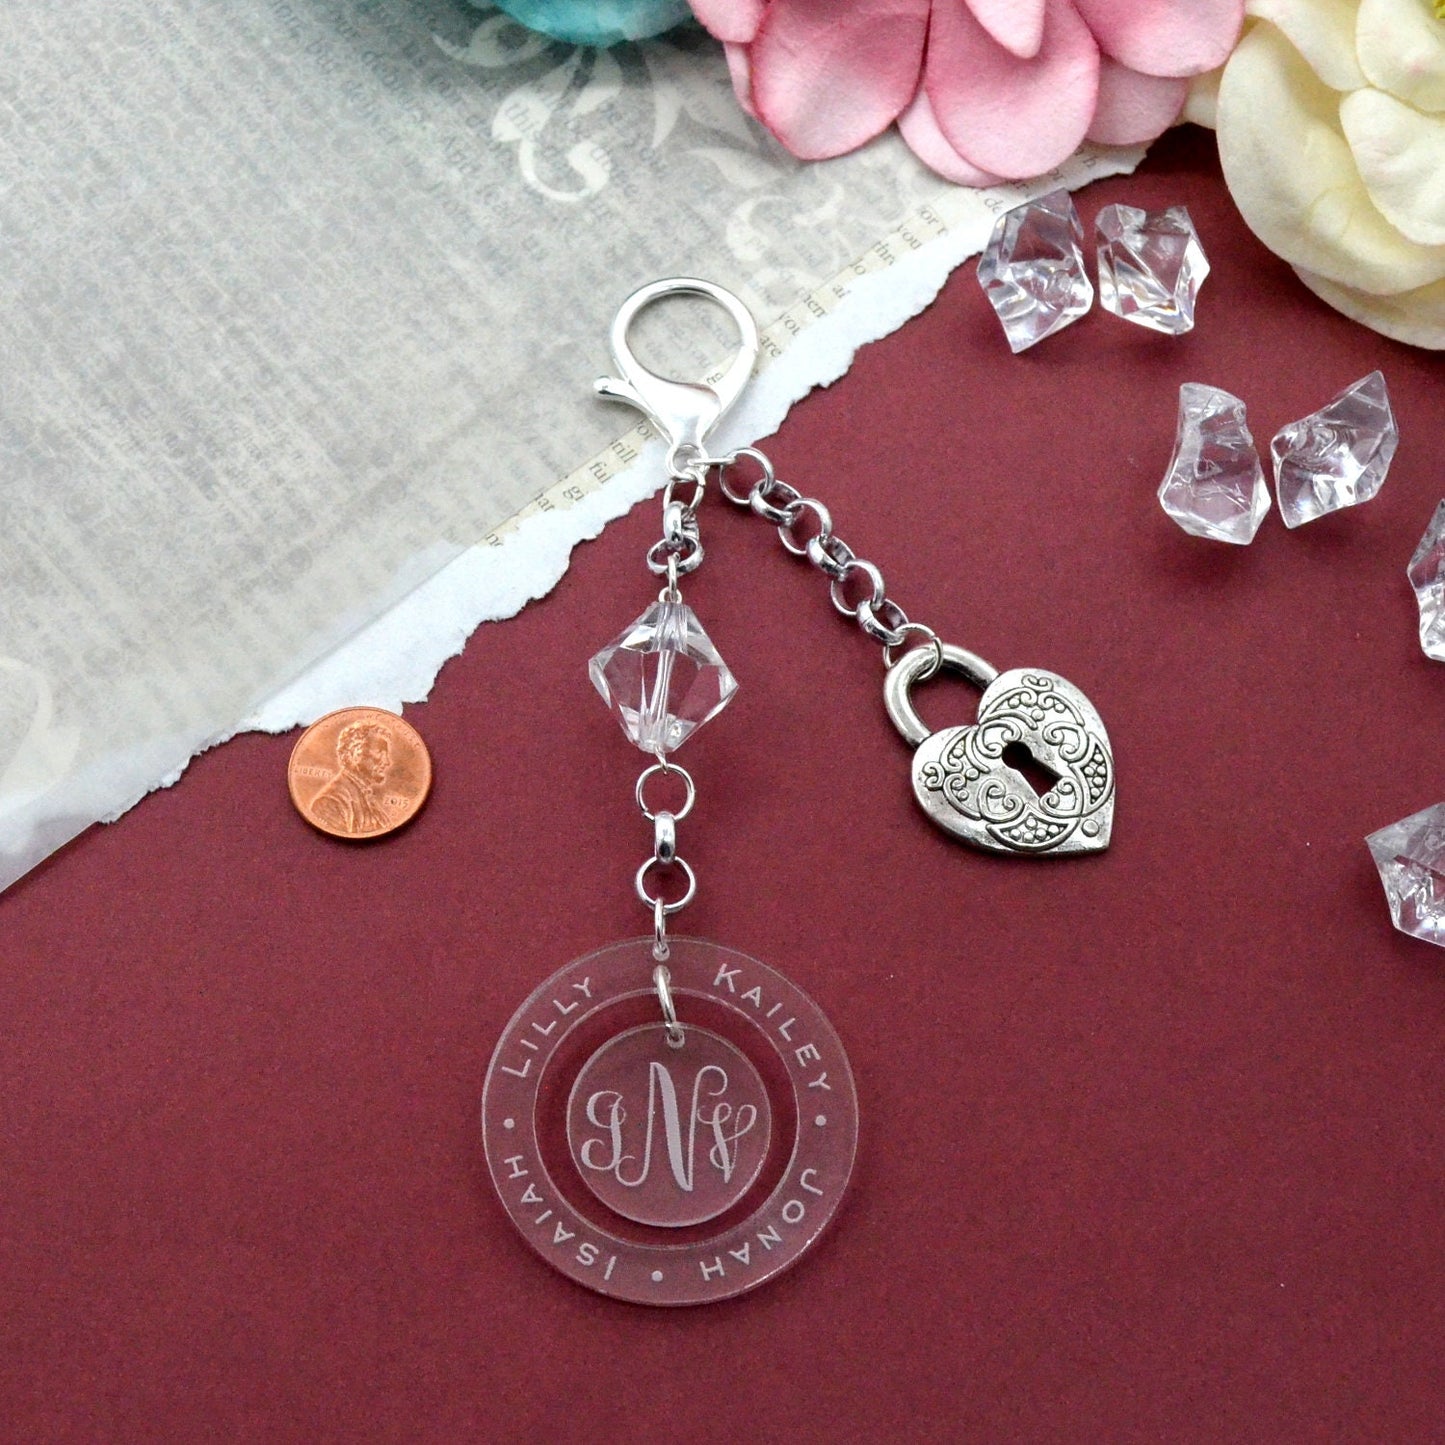 Family Name Purse Charm Custom Engraved Silver Colored Key Chain